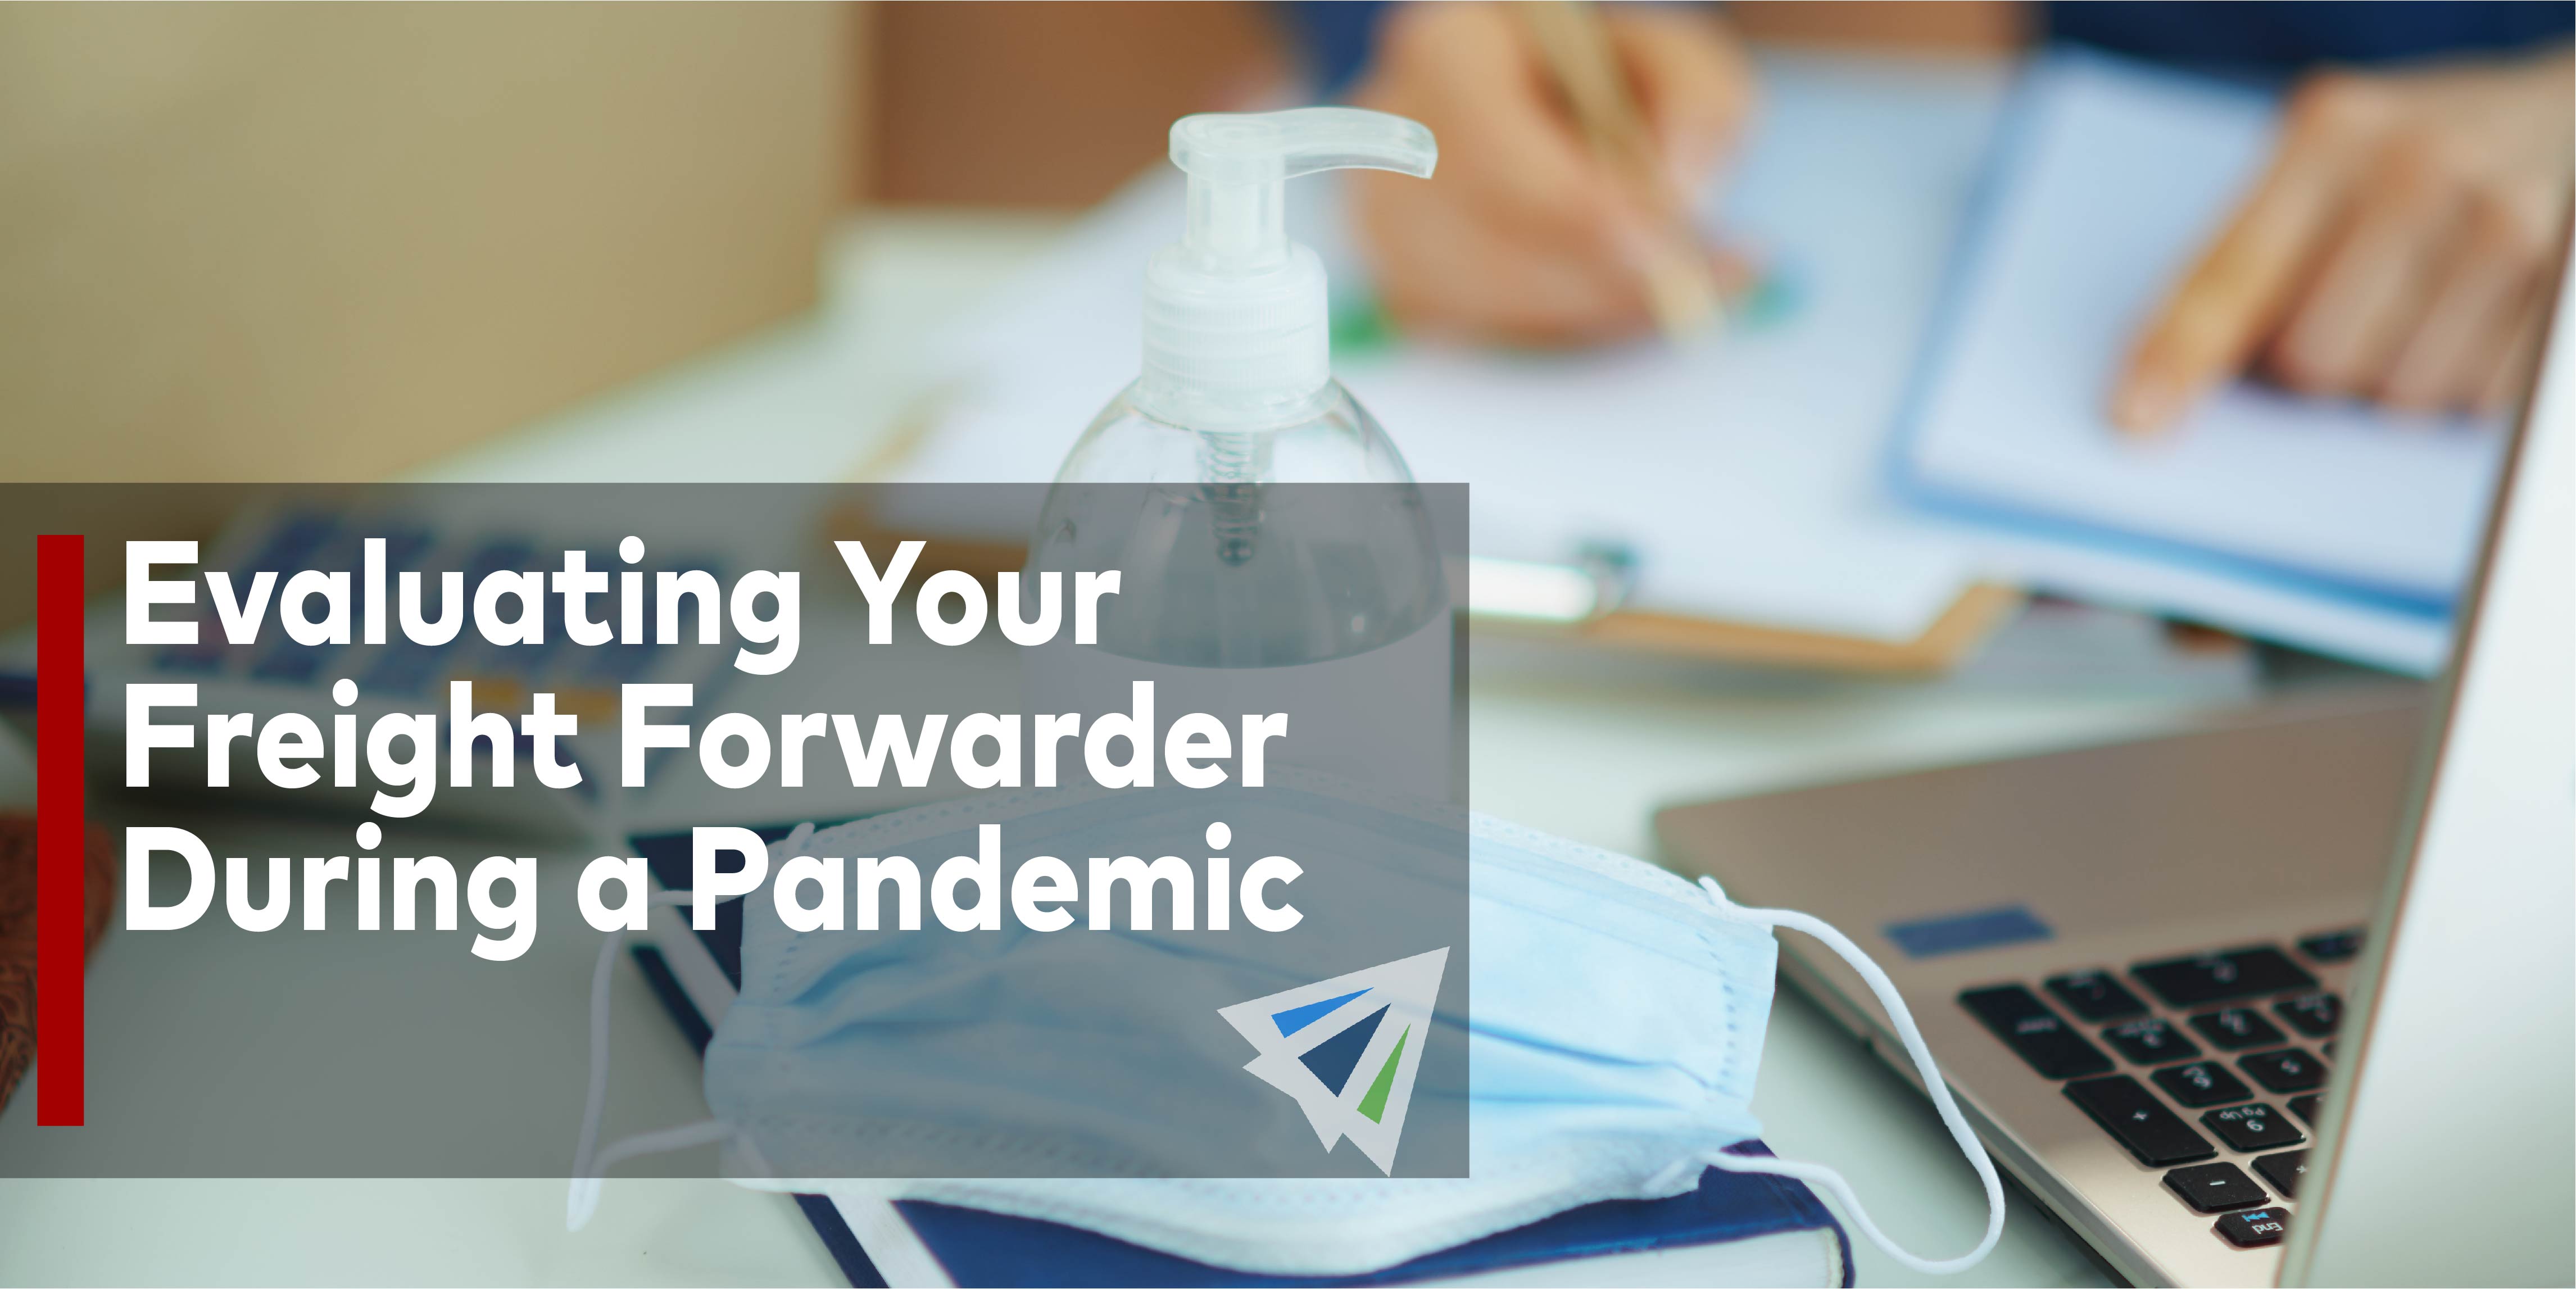 Evaluating Your Freight Forwarder During a Pandemic